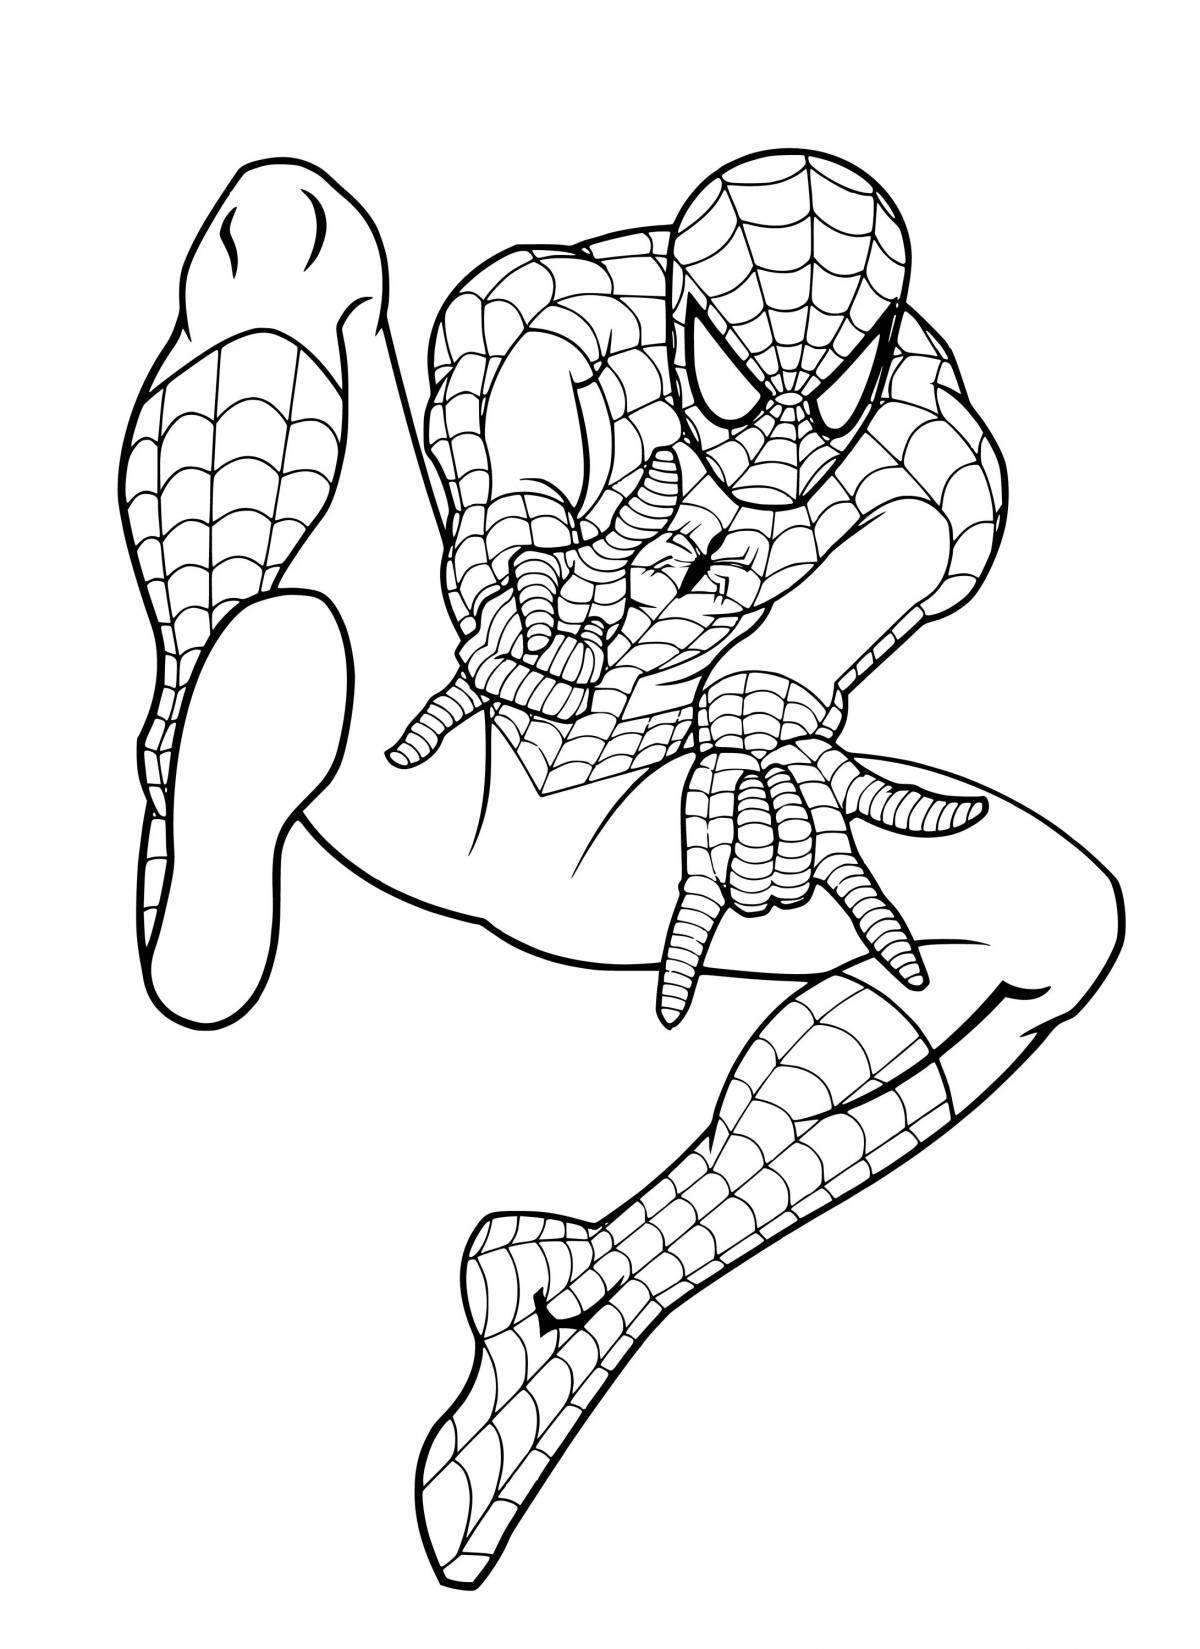 Joyful people coloring pages